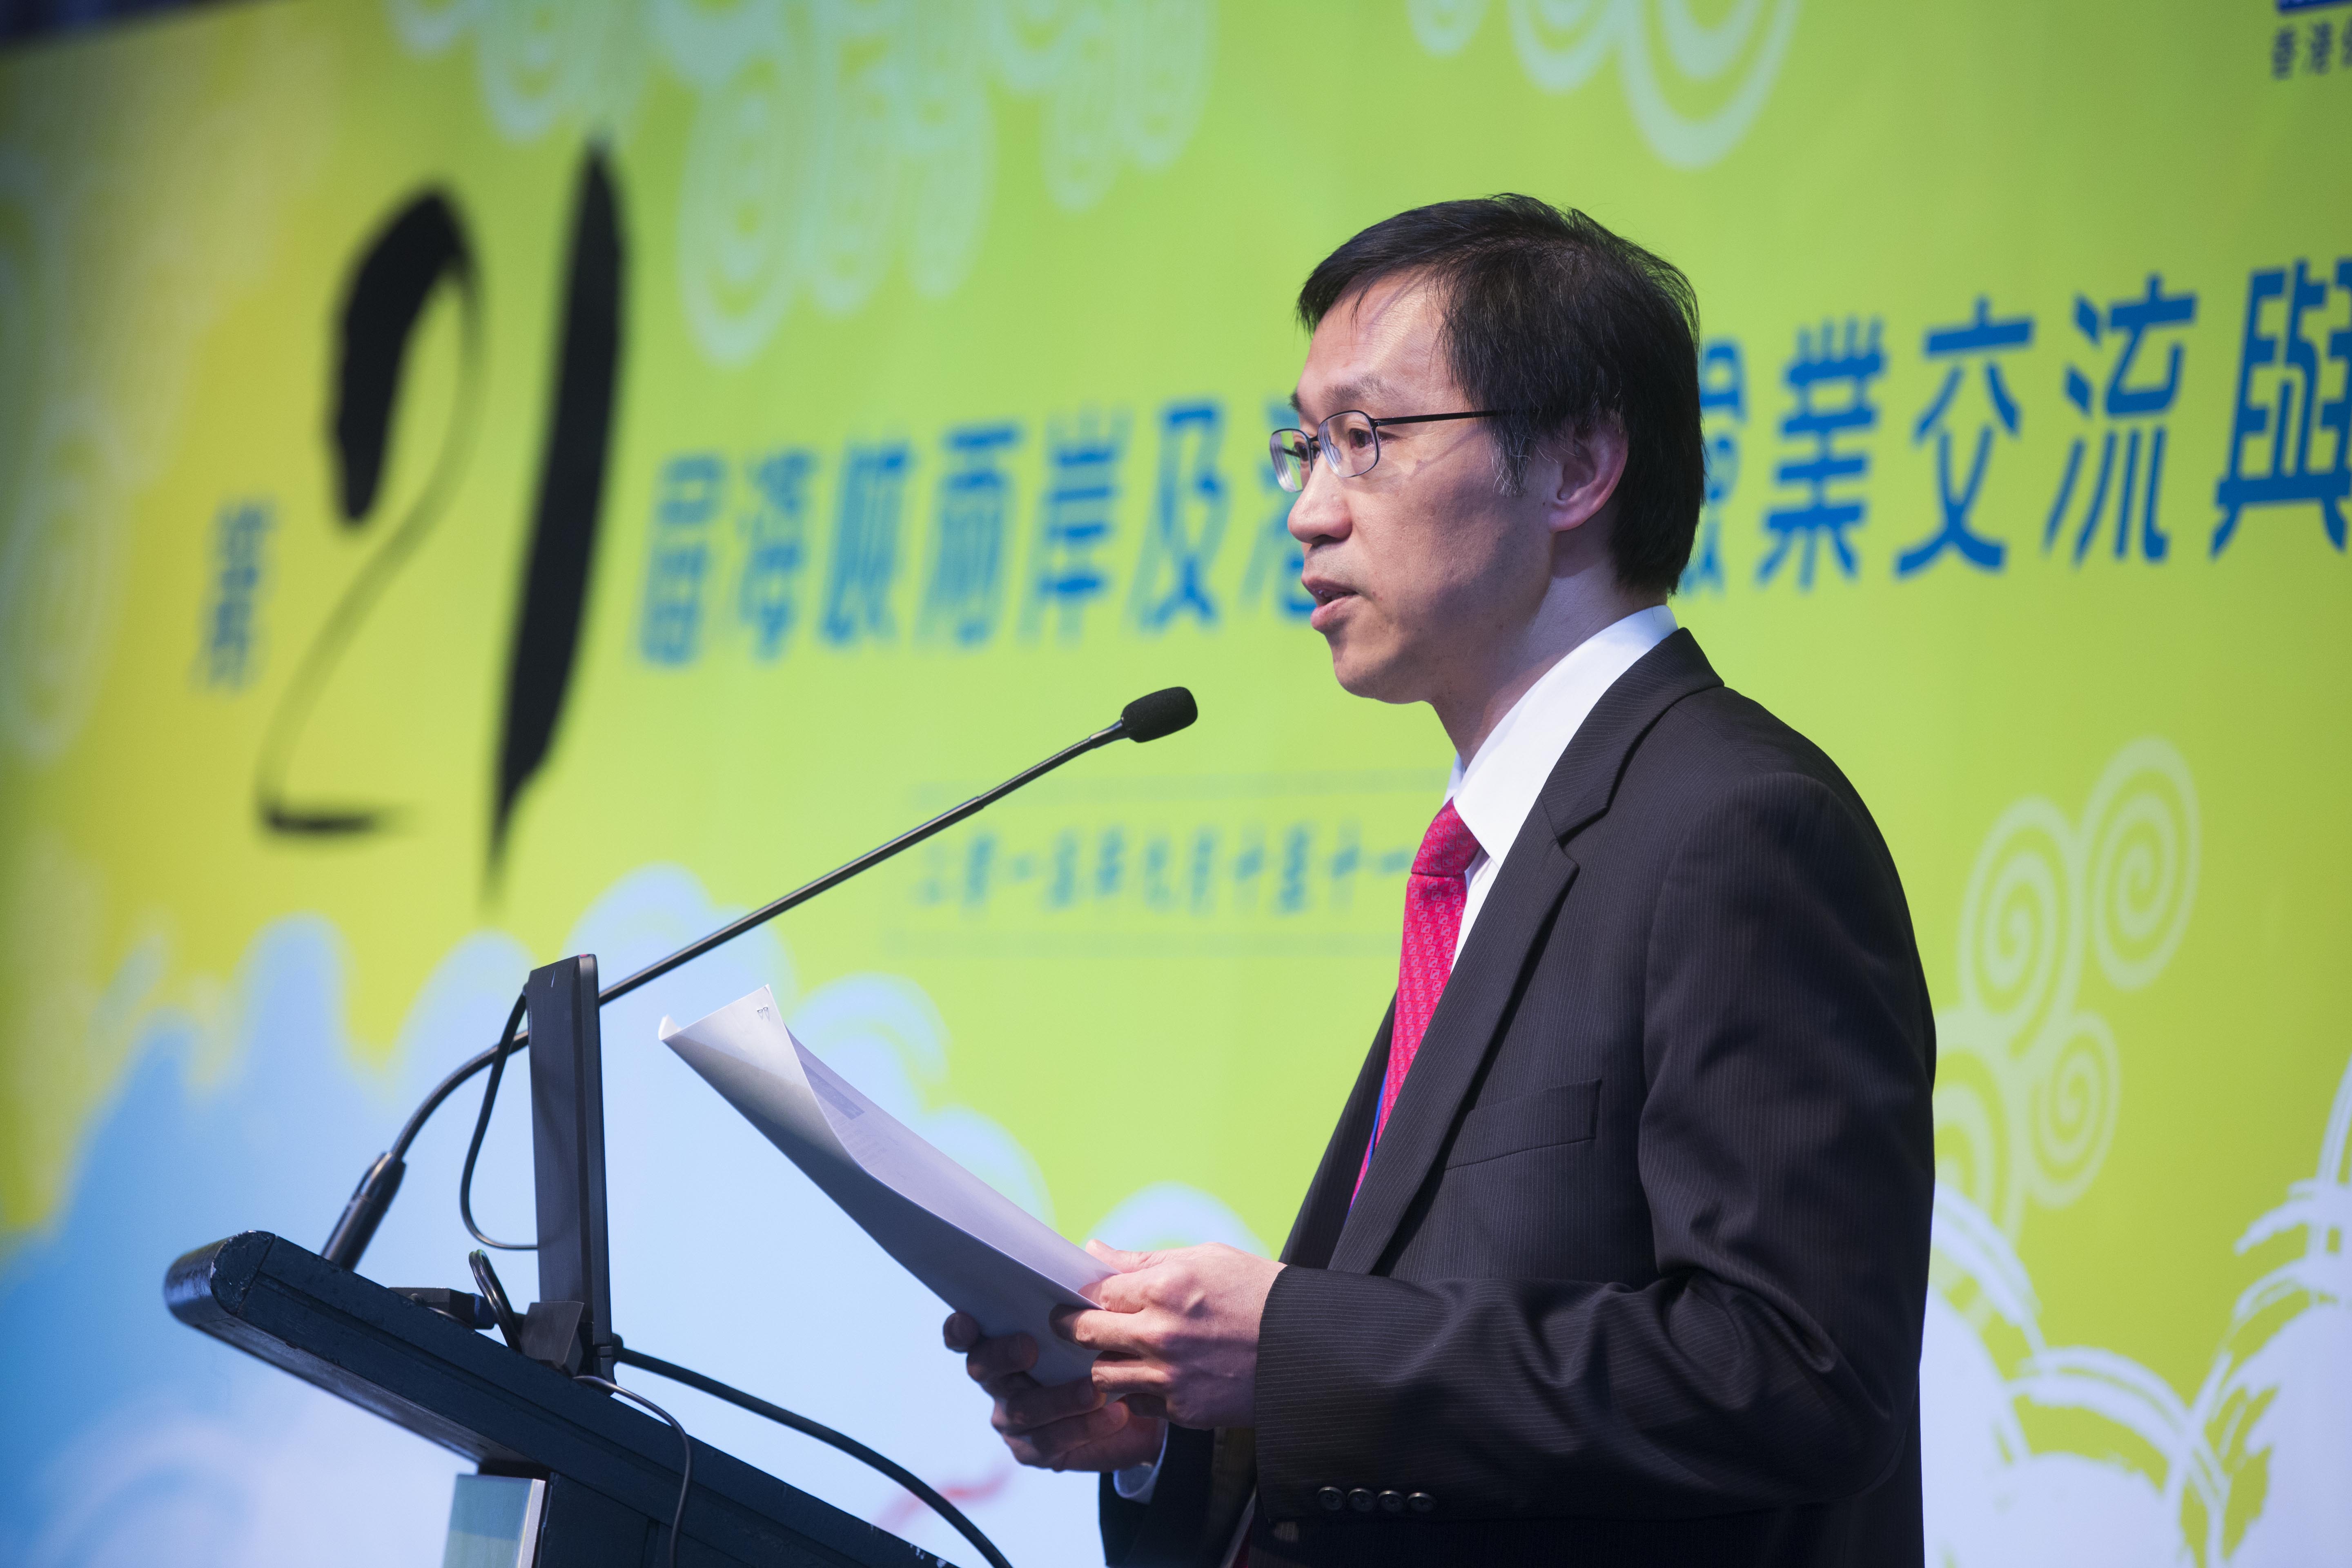 21st Cross Strait, Hong Kong & Macau Insurance Business Conference Opening Ceremony cum Plenary Session